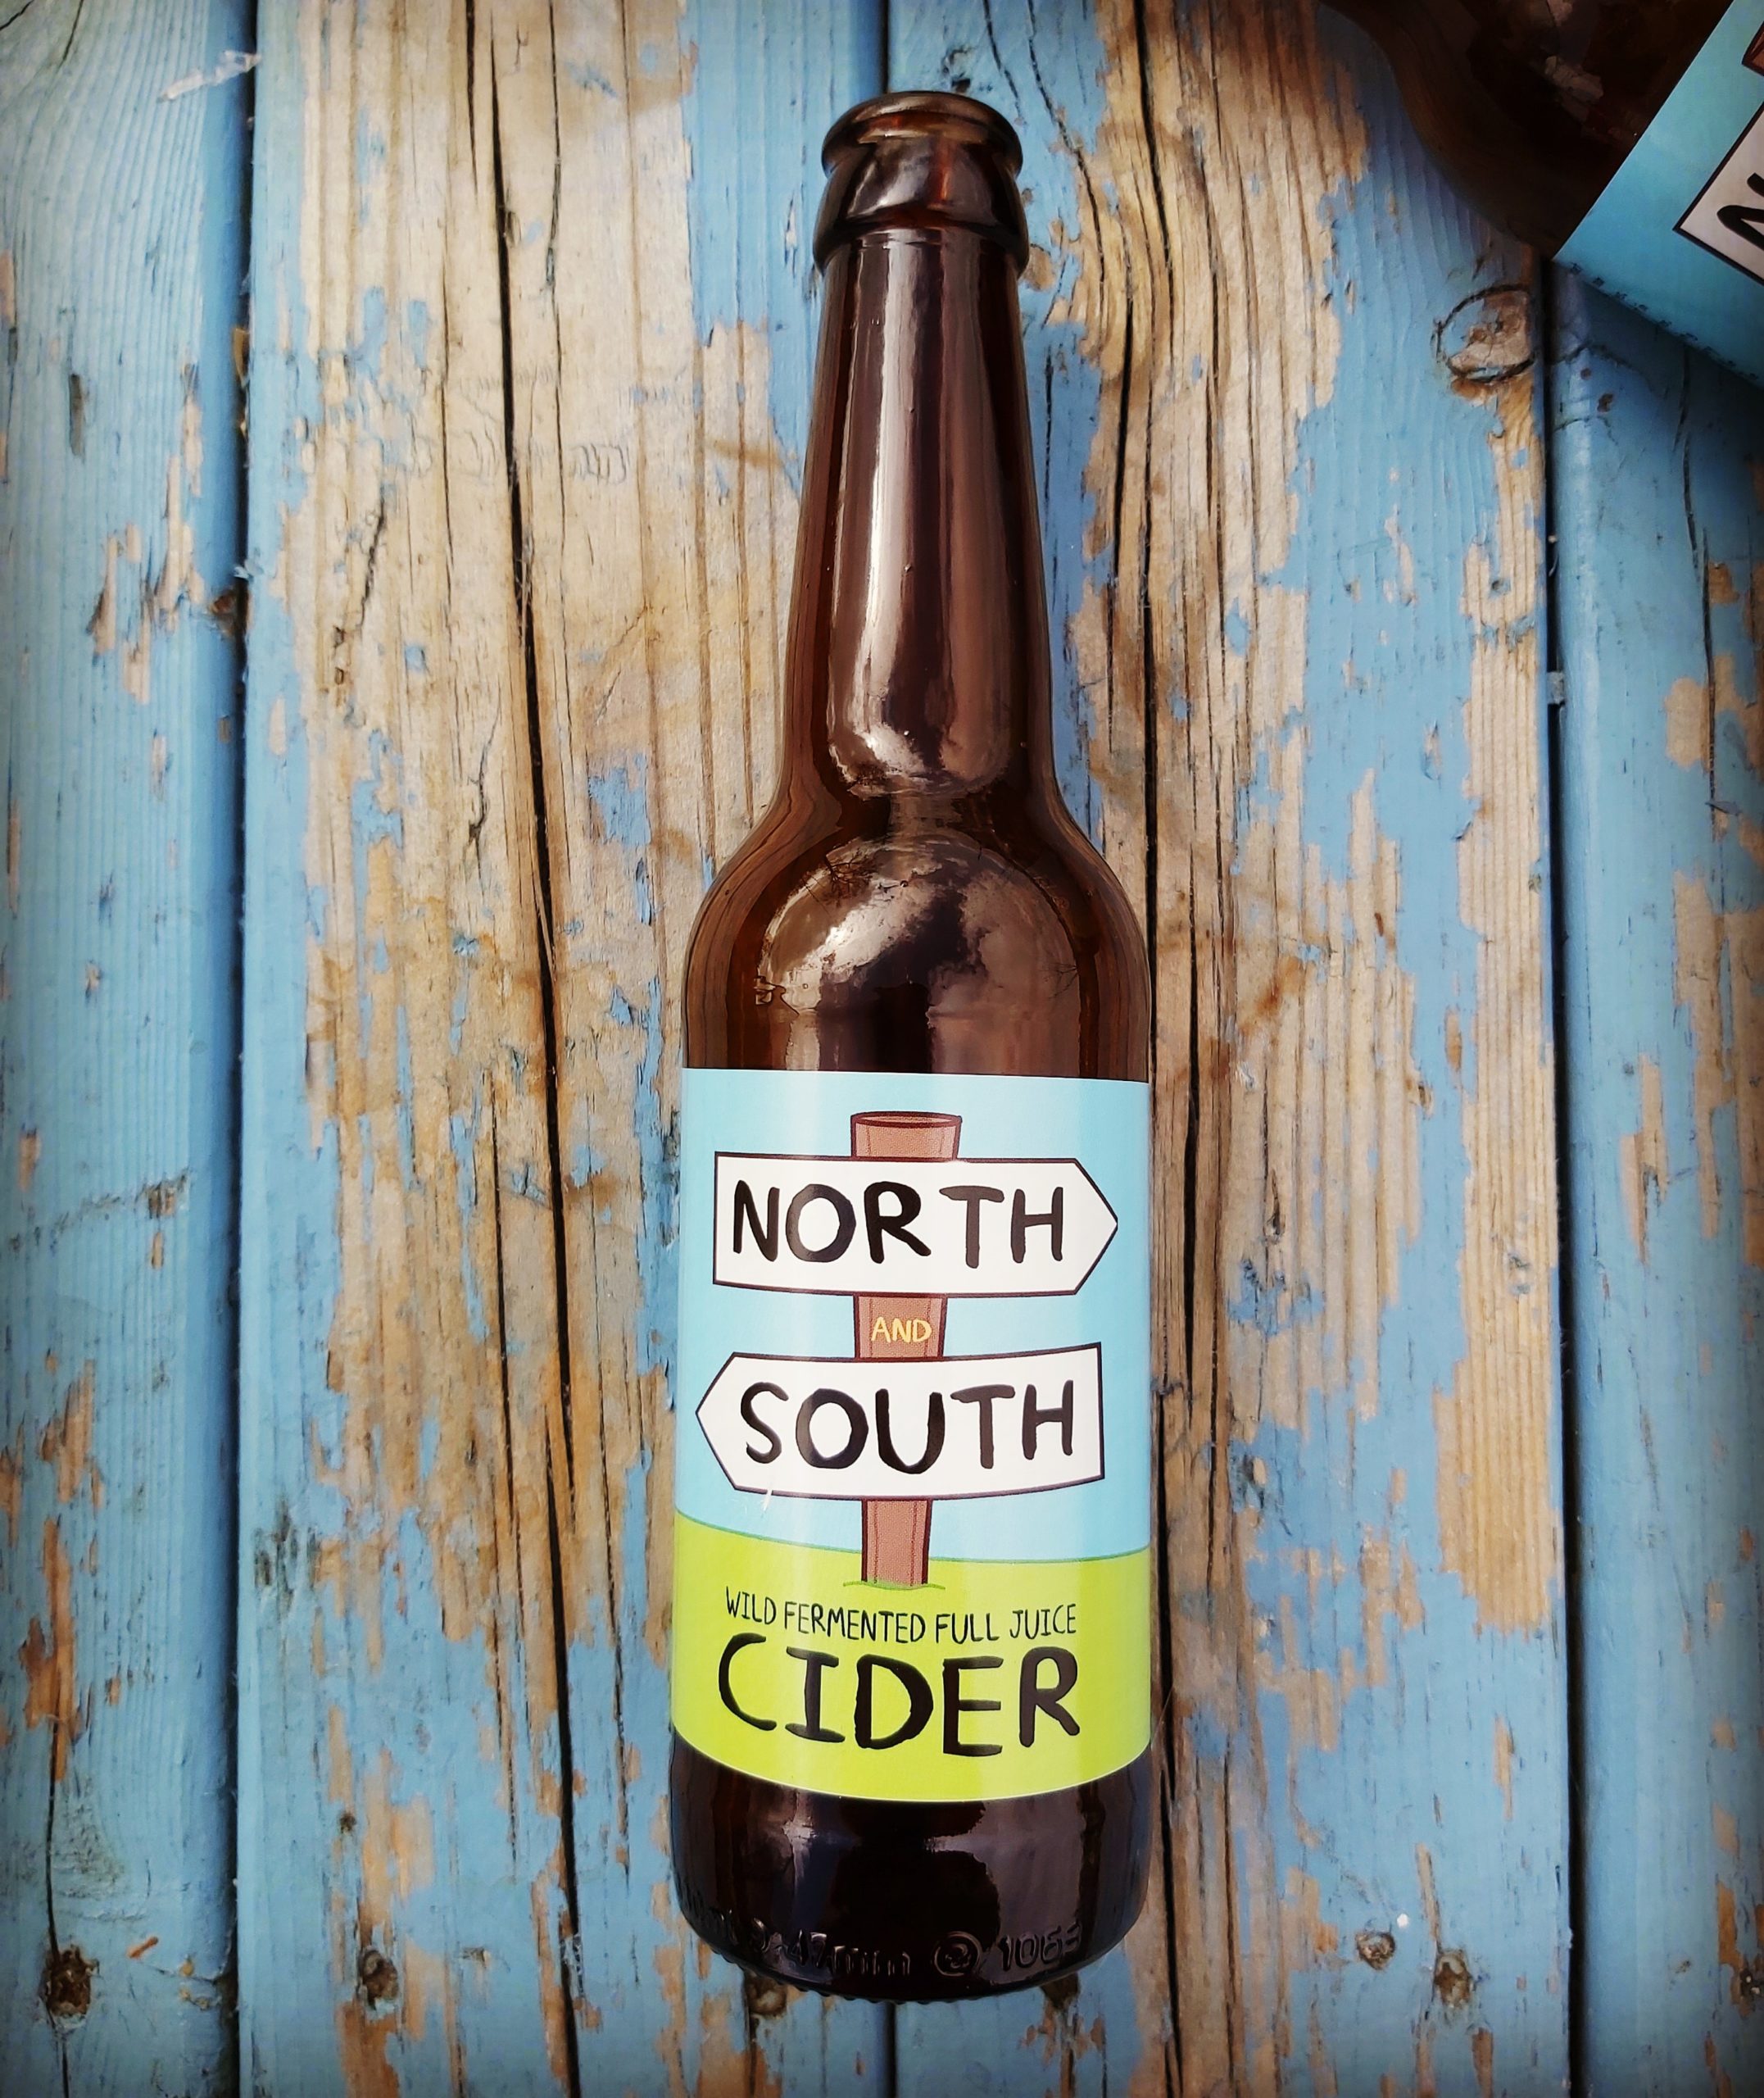 https://wpcluster.dctdigital.com/thecourier/wp-content/uploads/sites/12/2020/05/Caledonain-Cider-Co-North-And-South-scaled.jpg